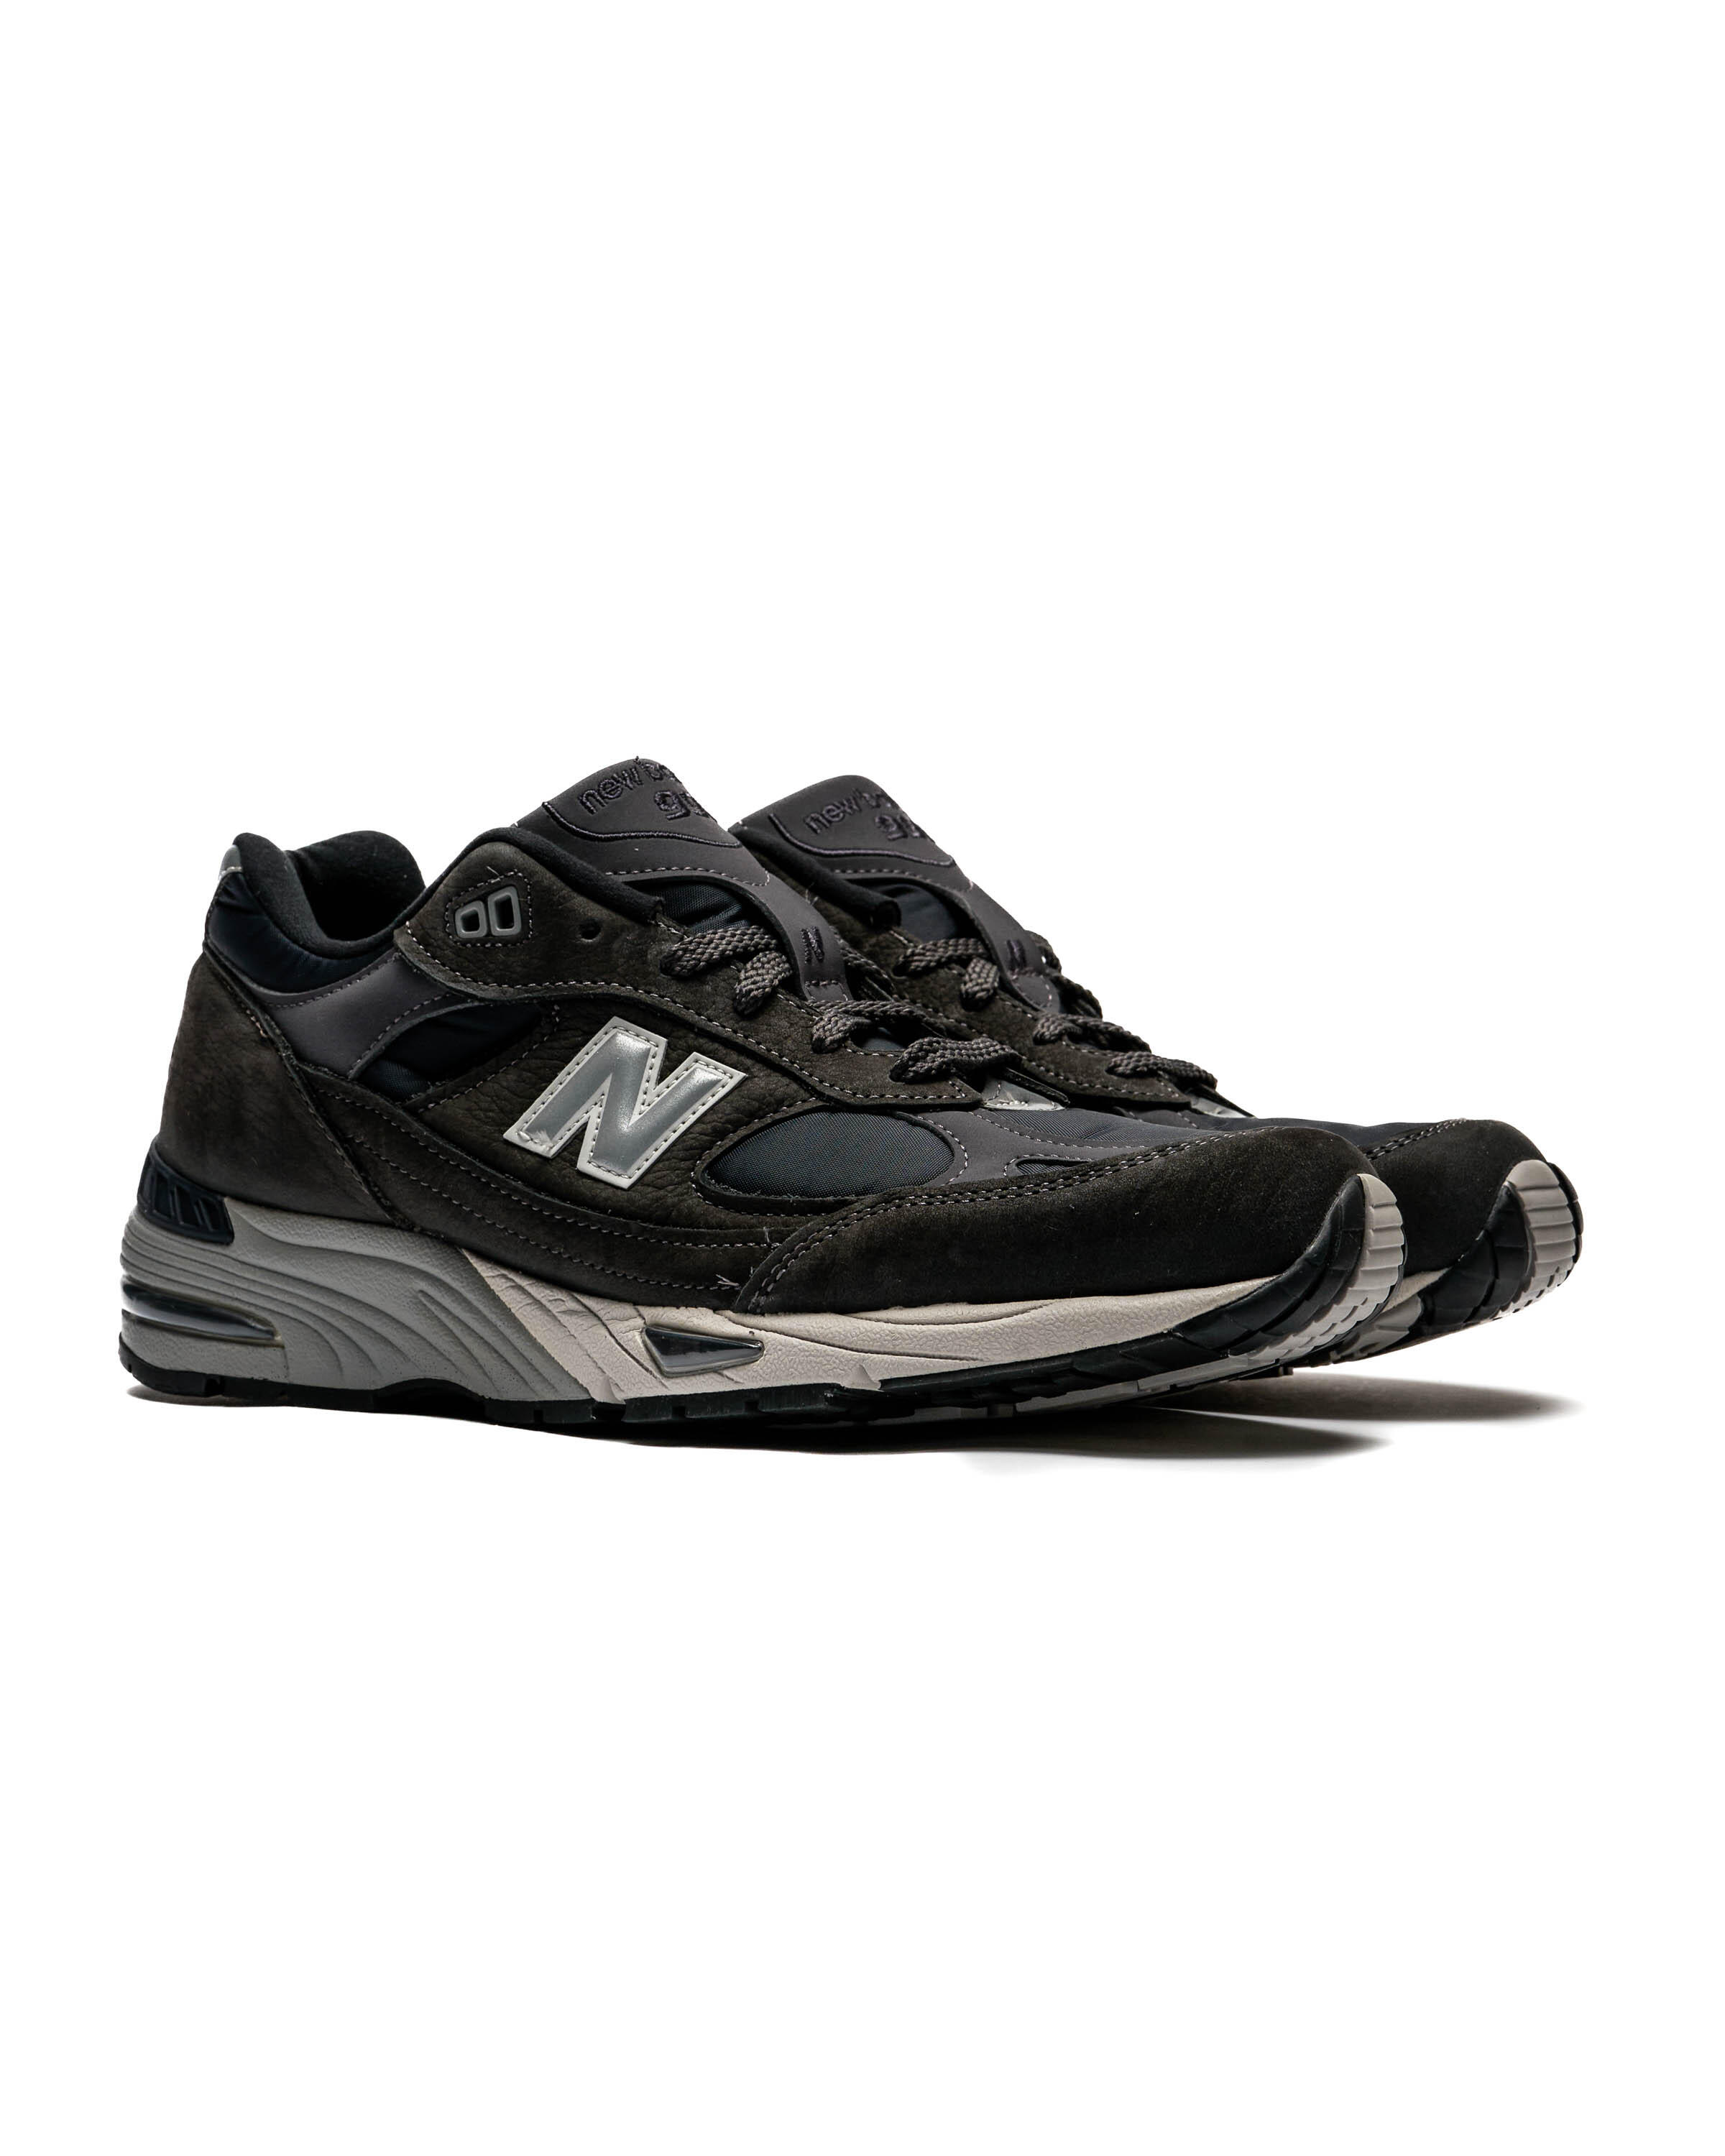 New Balance M 991 DGG - Made in England